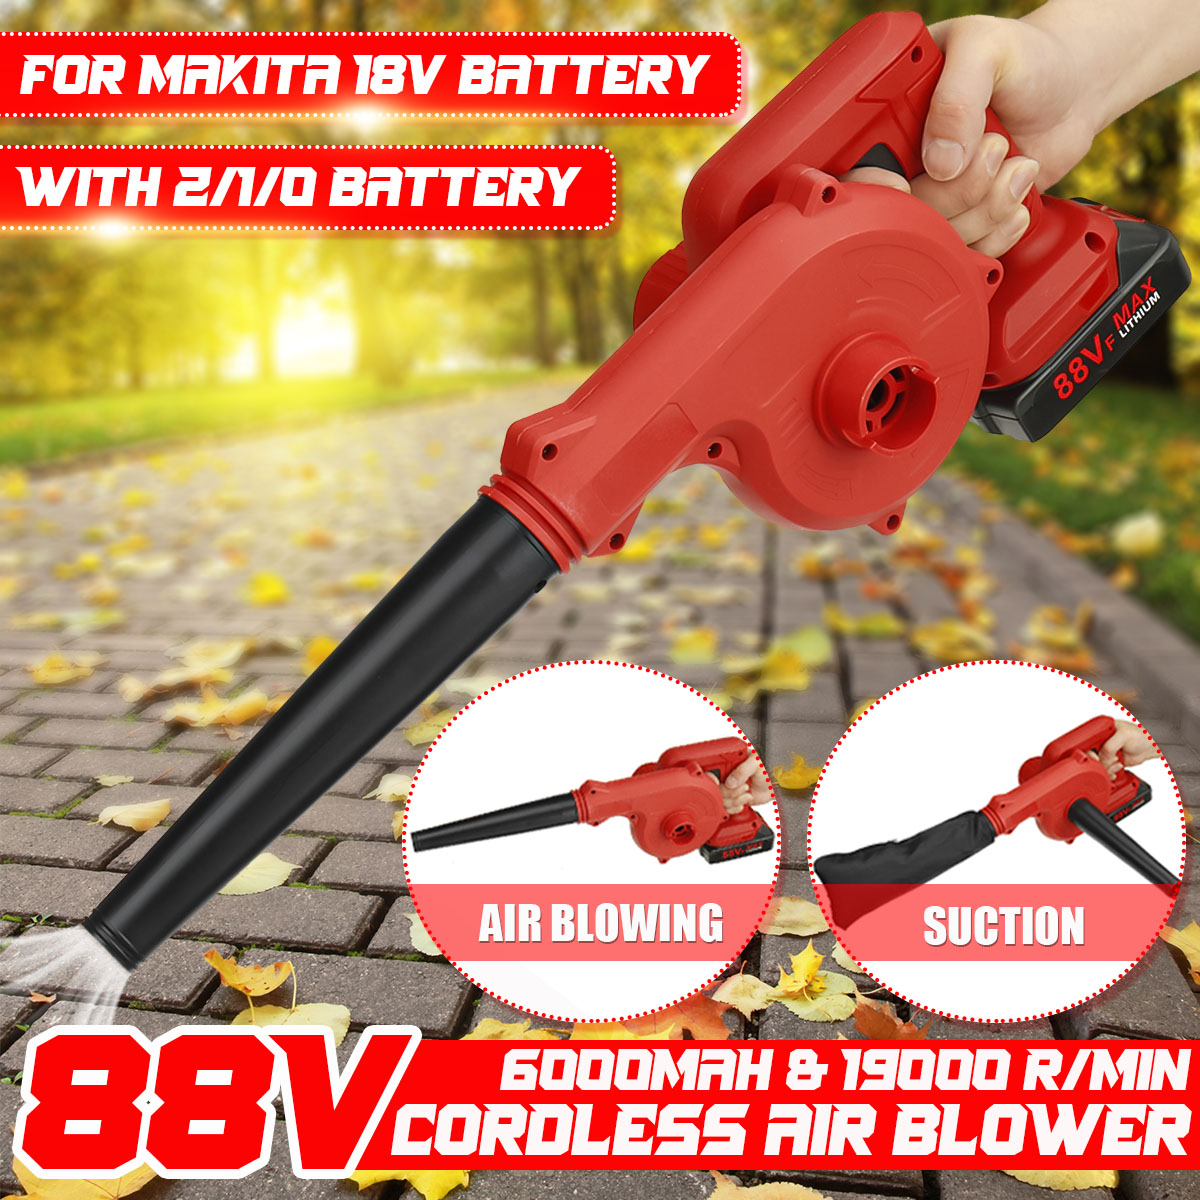 88VF-Garden-Cordless-Air-Blower-Vacuum-Cleaner-Blower-For-Dust-Blowing-W-None12pcs-Battery-Also-for--1851657-2